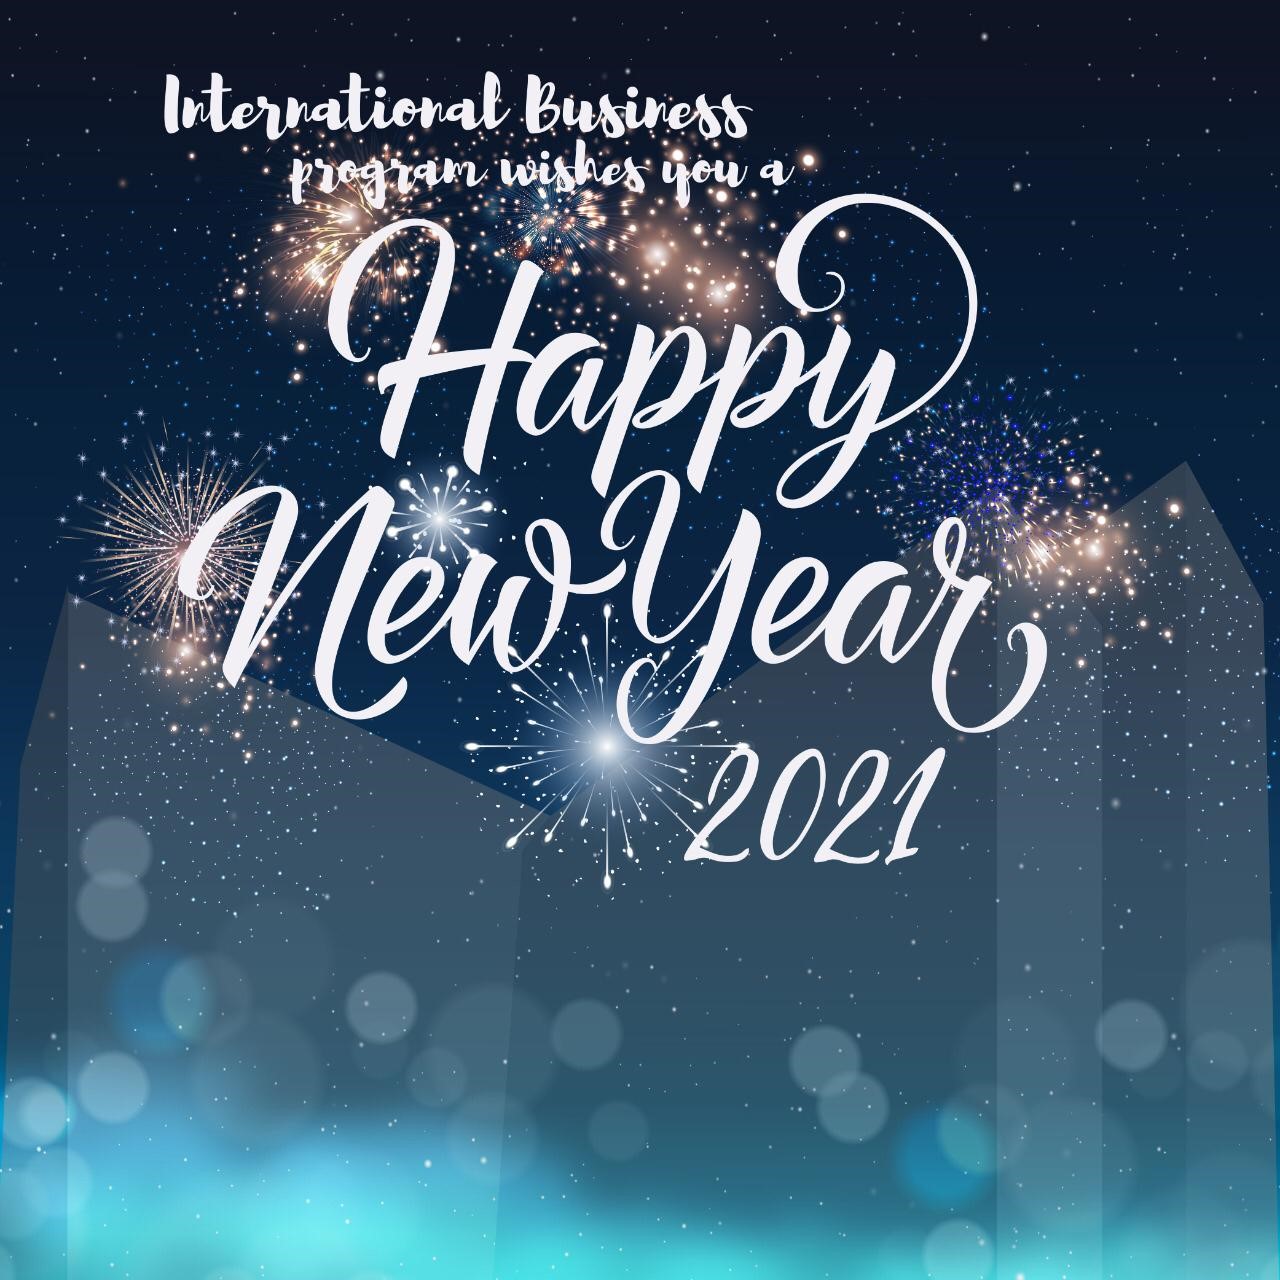 International Business Program wishes you a Happy New Year 2021 ...